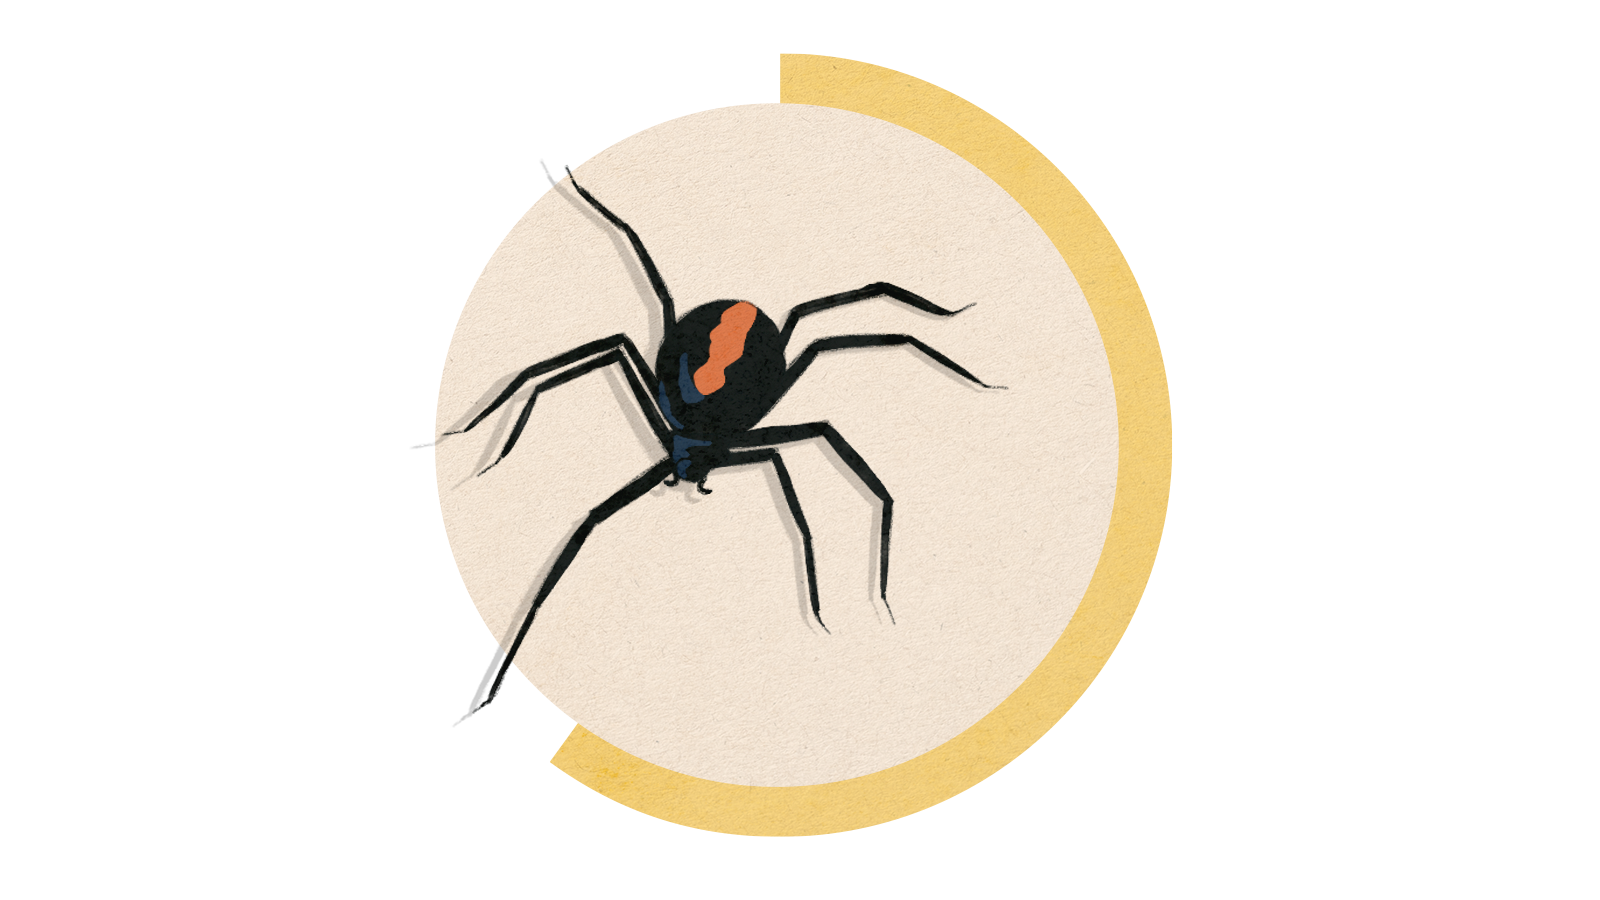 Illustration of a redback spider on a circle background.